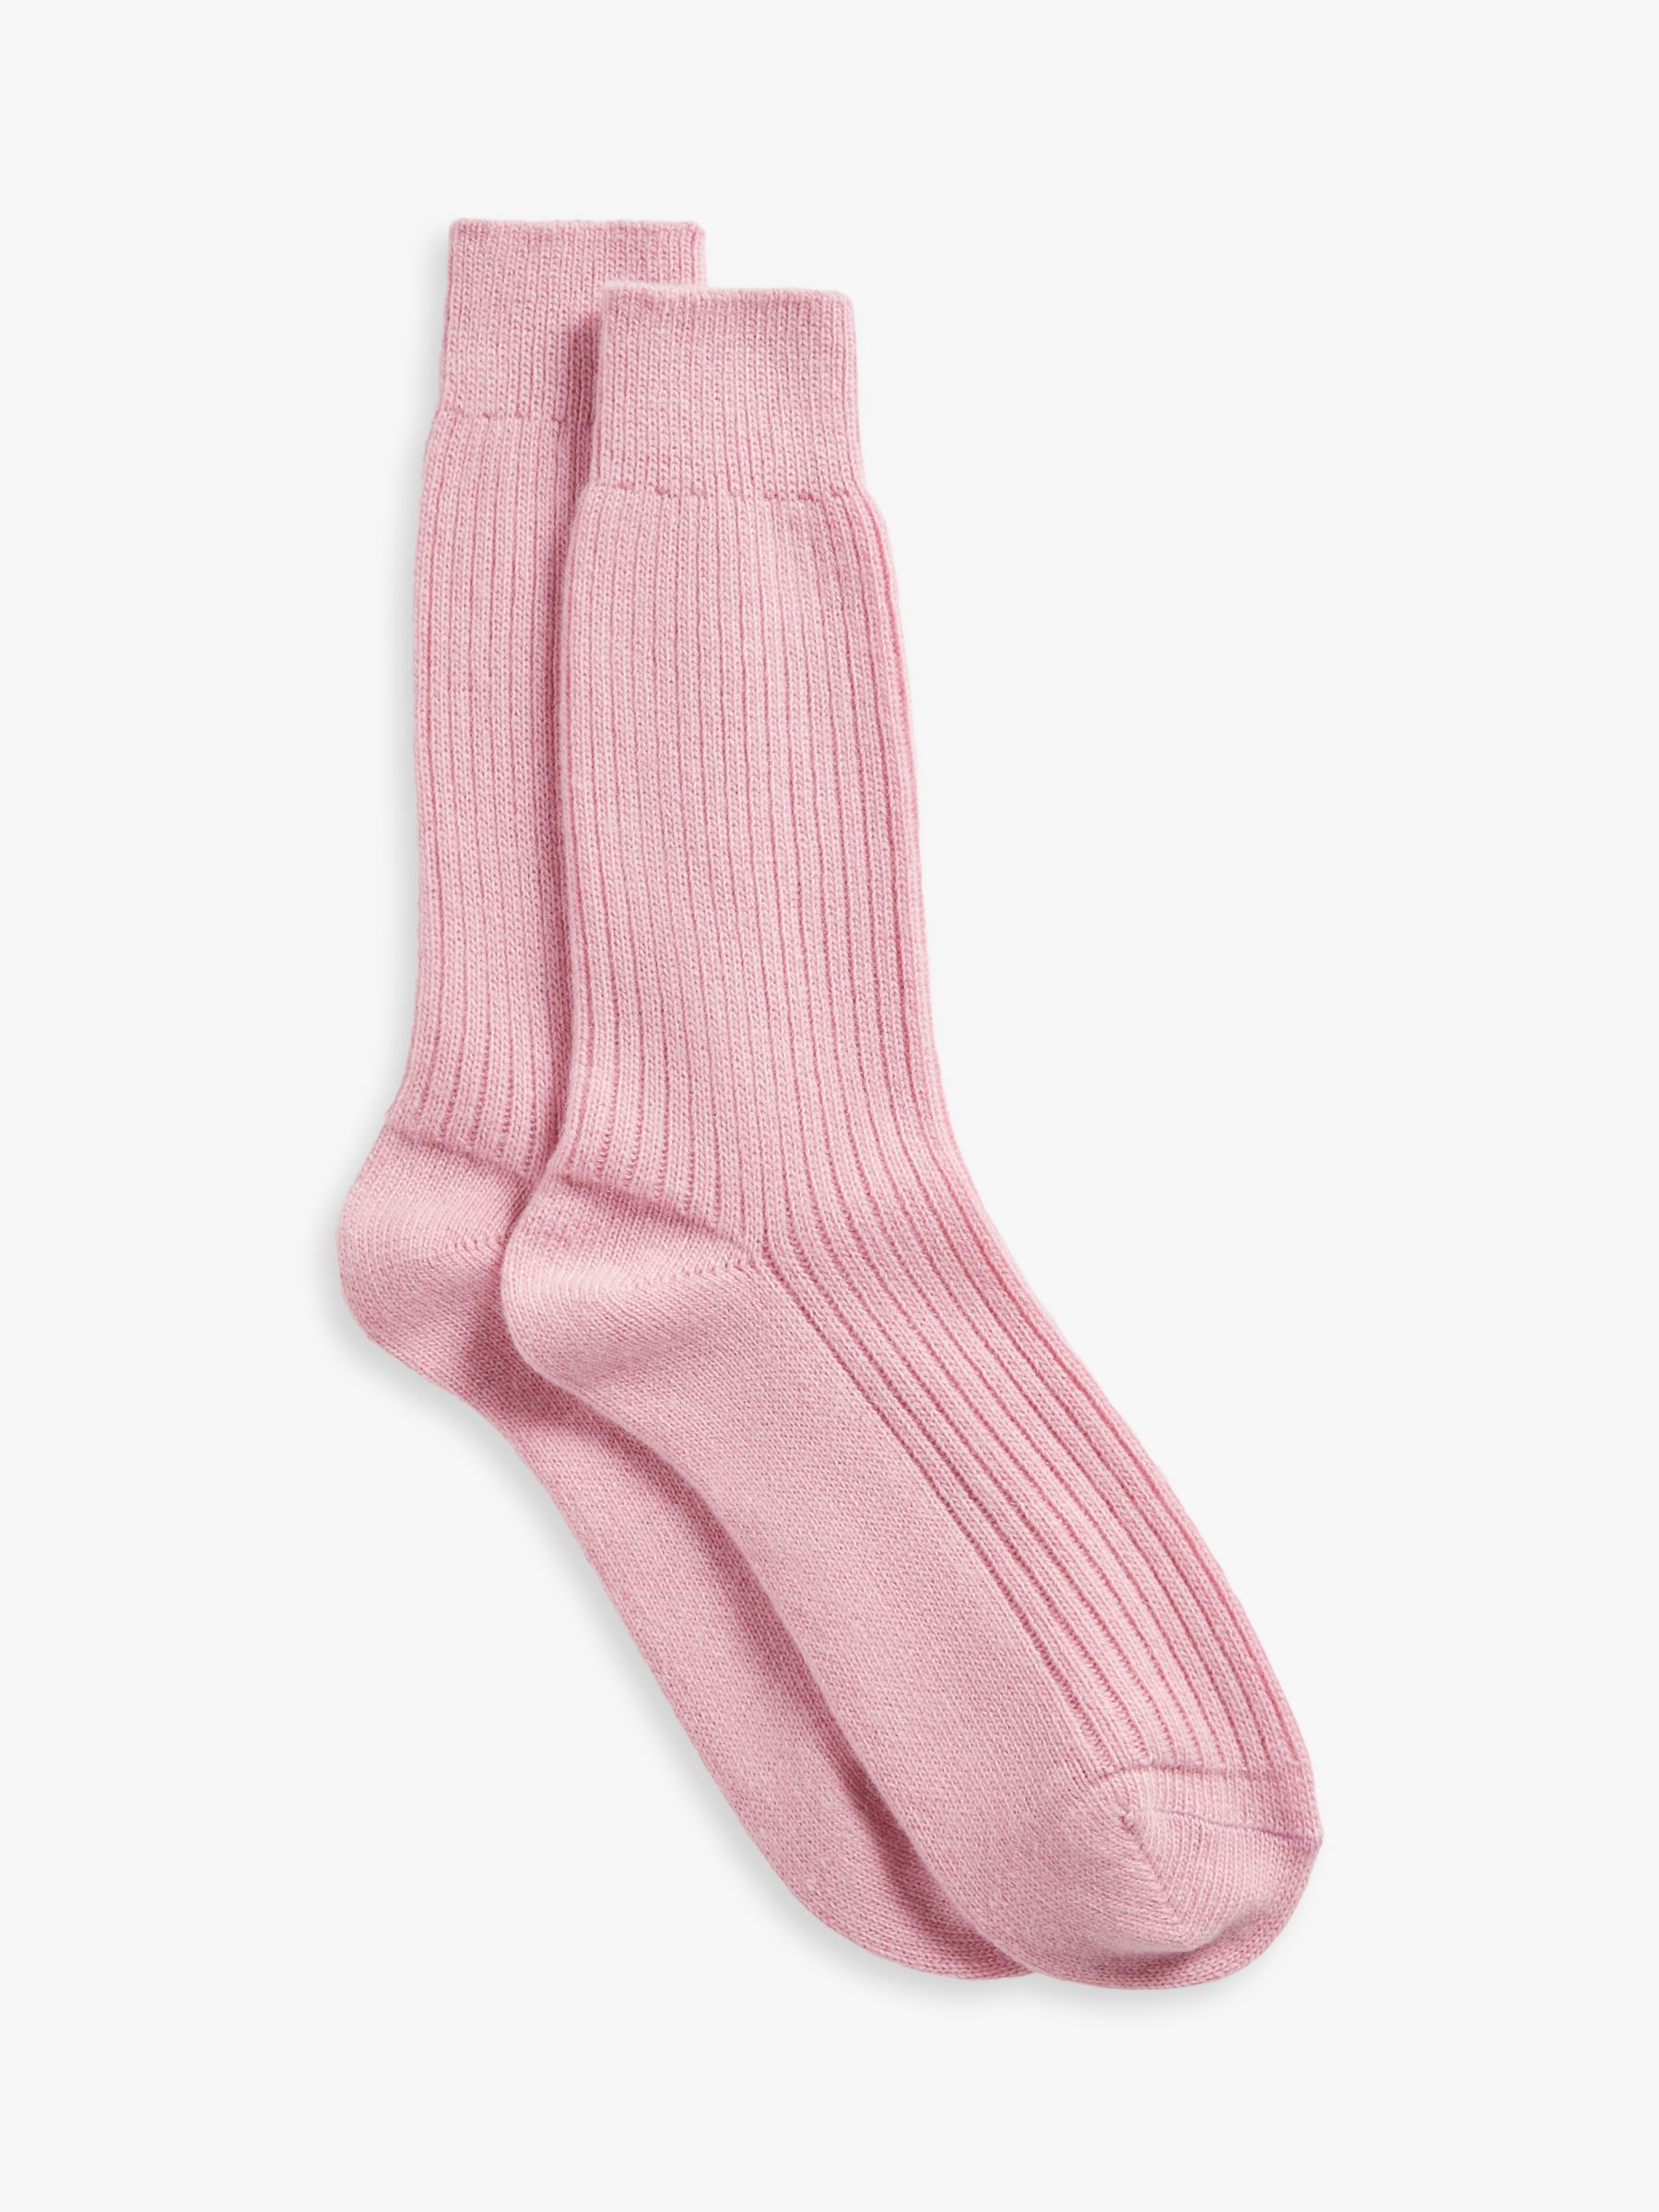 John Lewis & Partners Women's Cashmere Bed Ankle Socks, Light Pink at ...